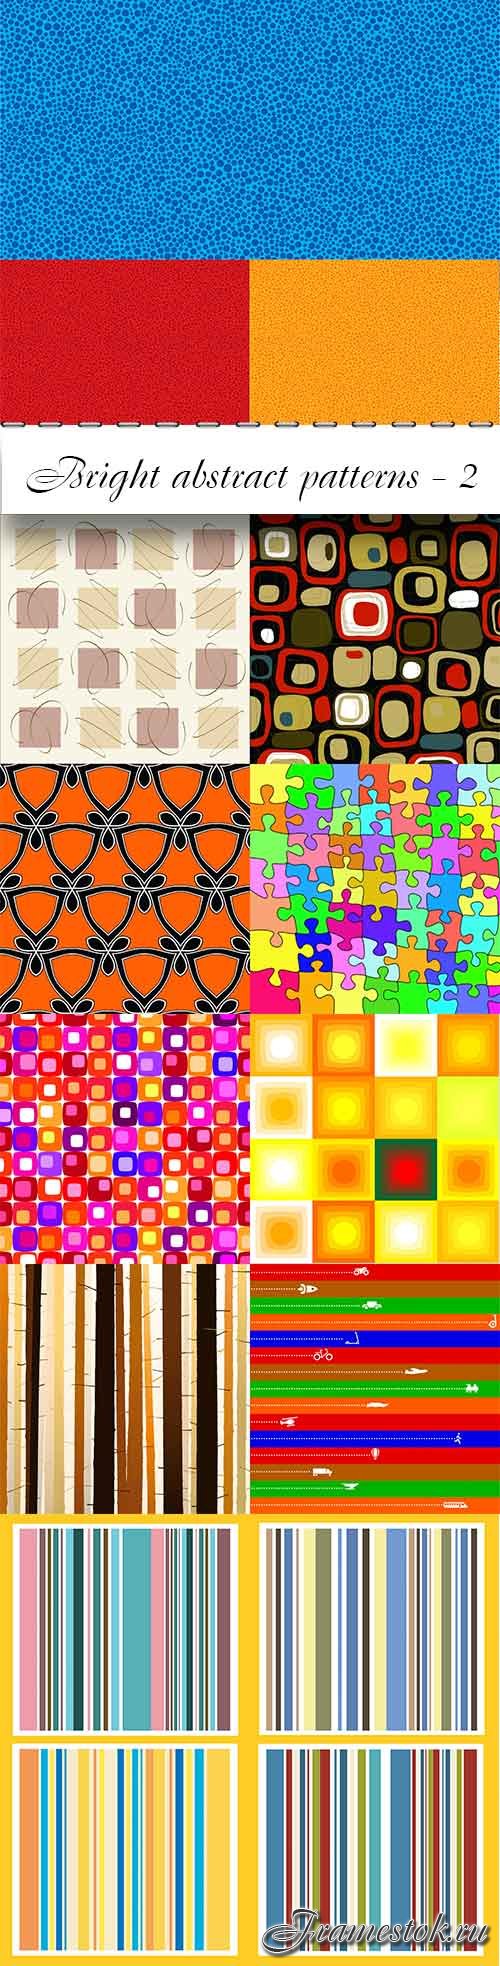 Bright abstract patterns - 2